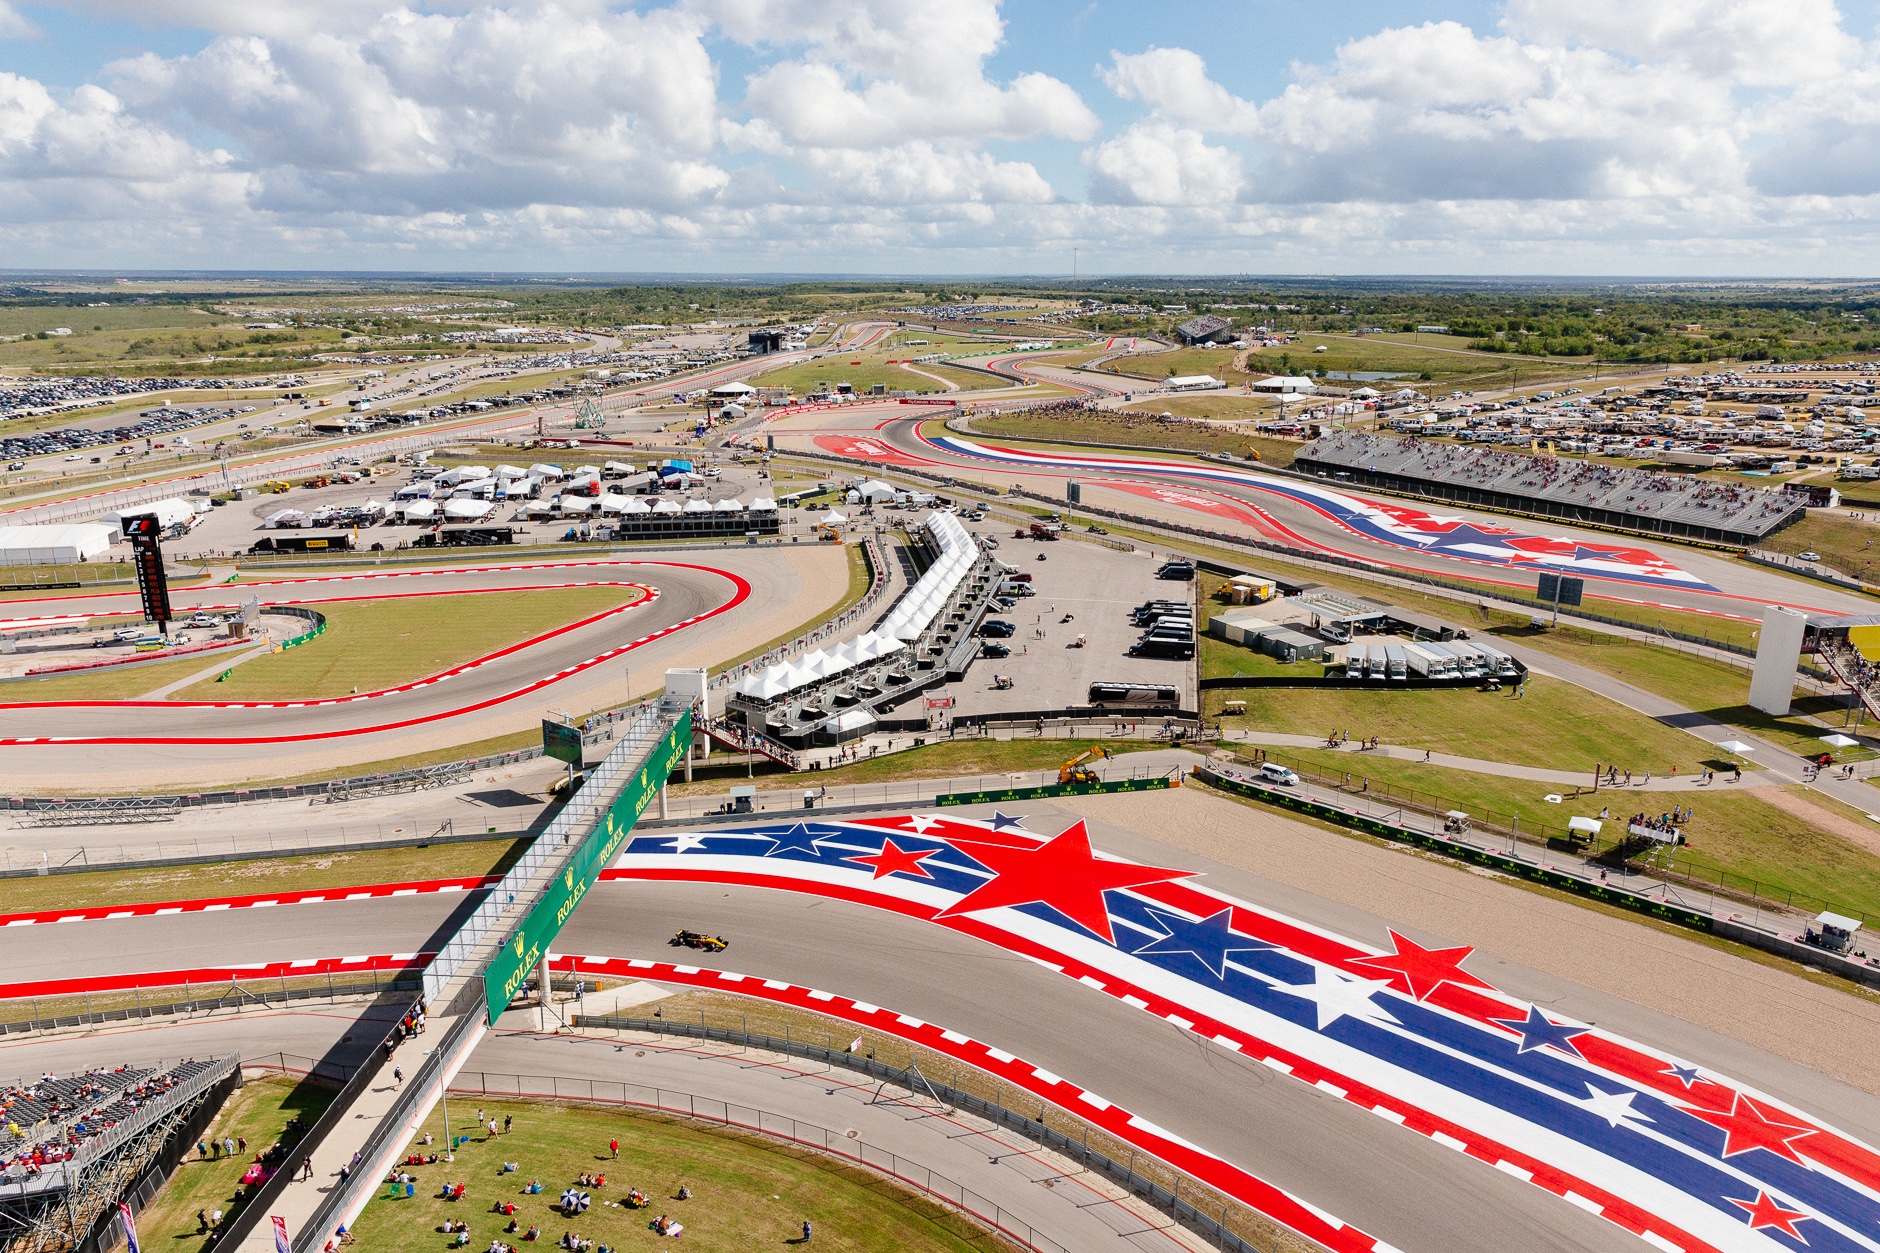 The view from the COTA observation tower facing towards the infield party zone and the super stage area. The visibility on Saturday was approximately 20 miles.